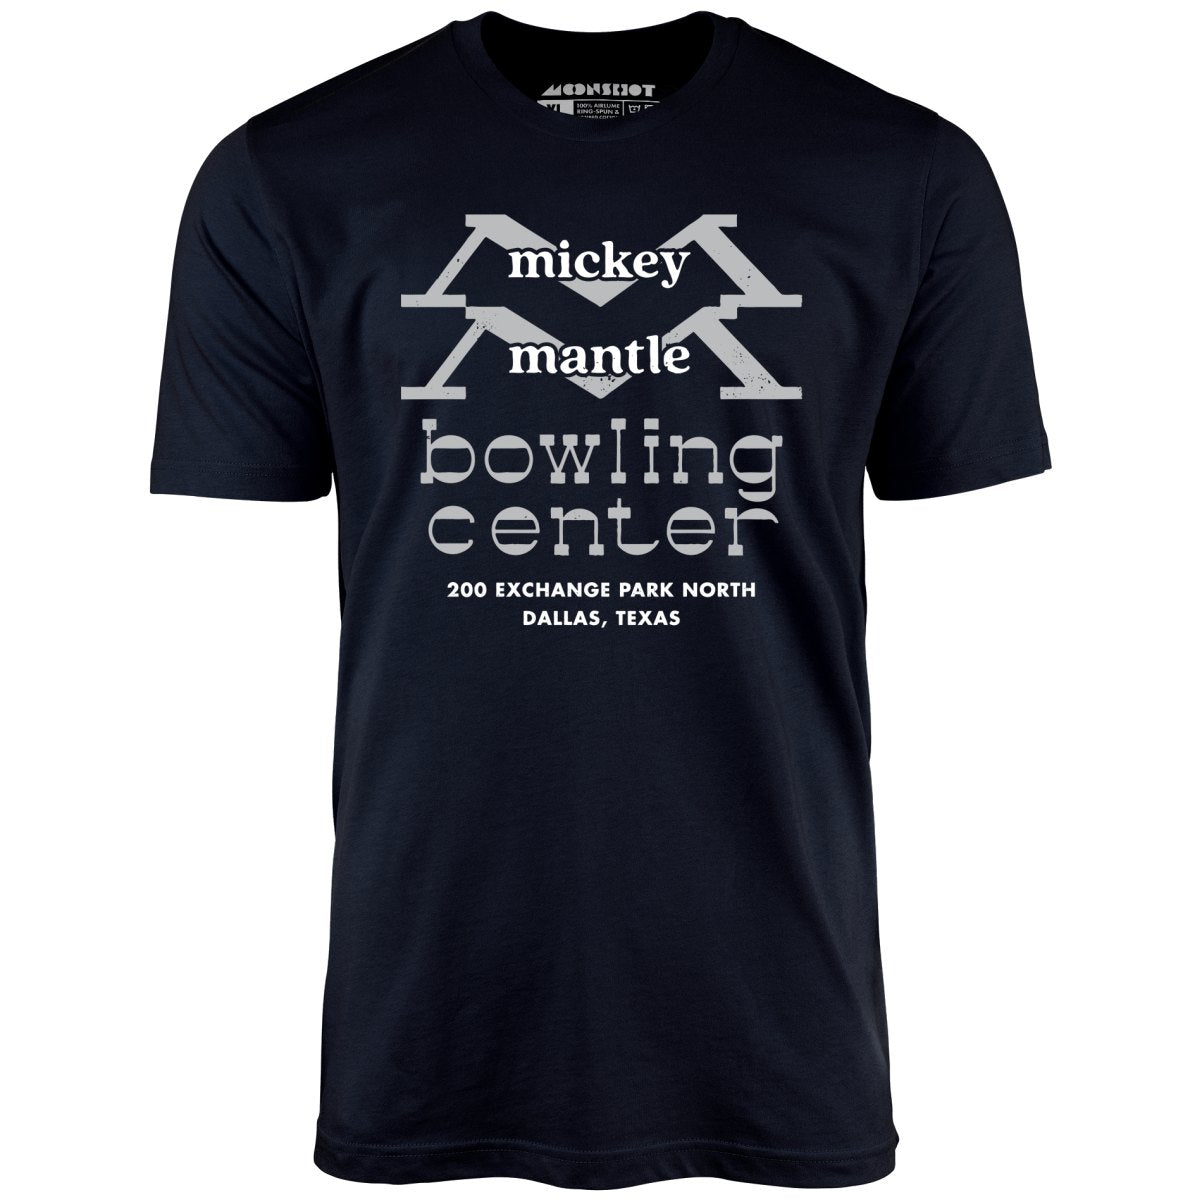 White Label Mfg Mickey Mantle Bowling Center - Dallas, TX - Vintage Bowling Alley - Unisex T-Shirt Black / S